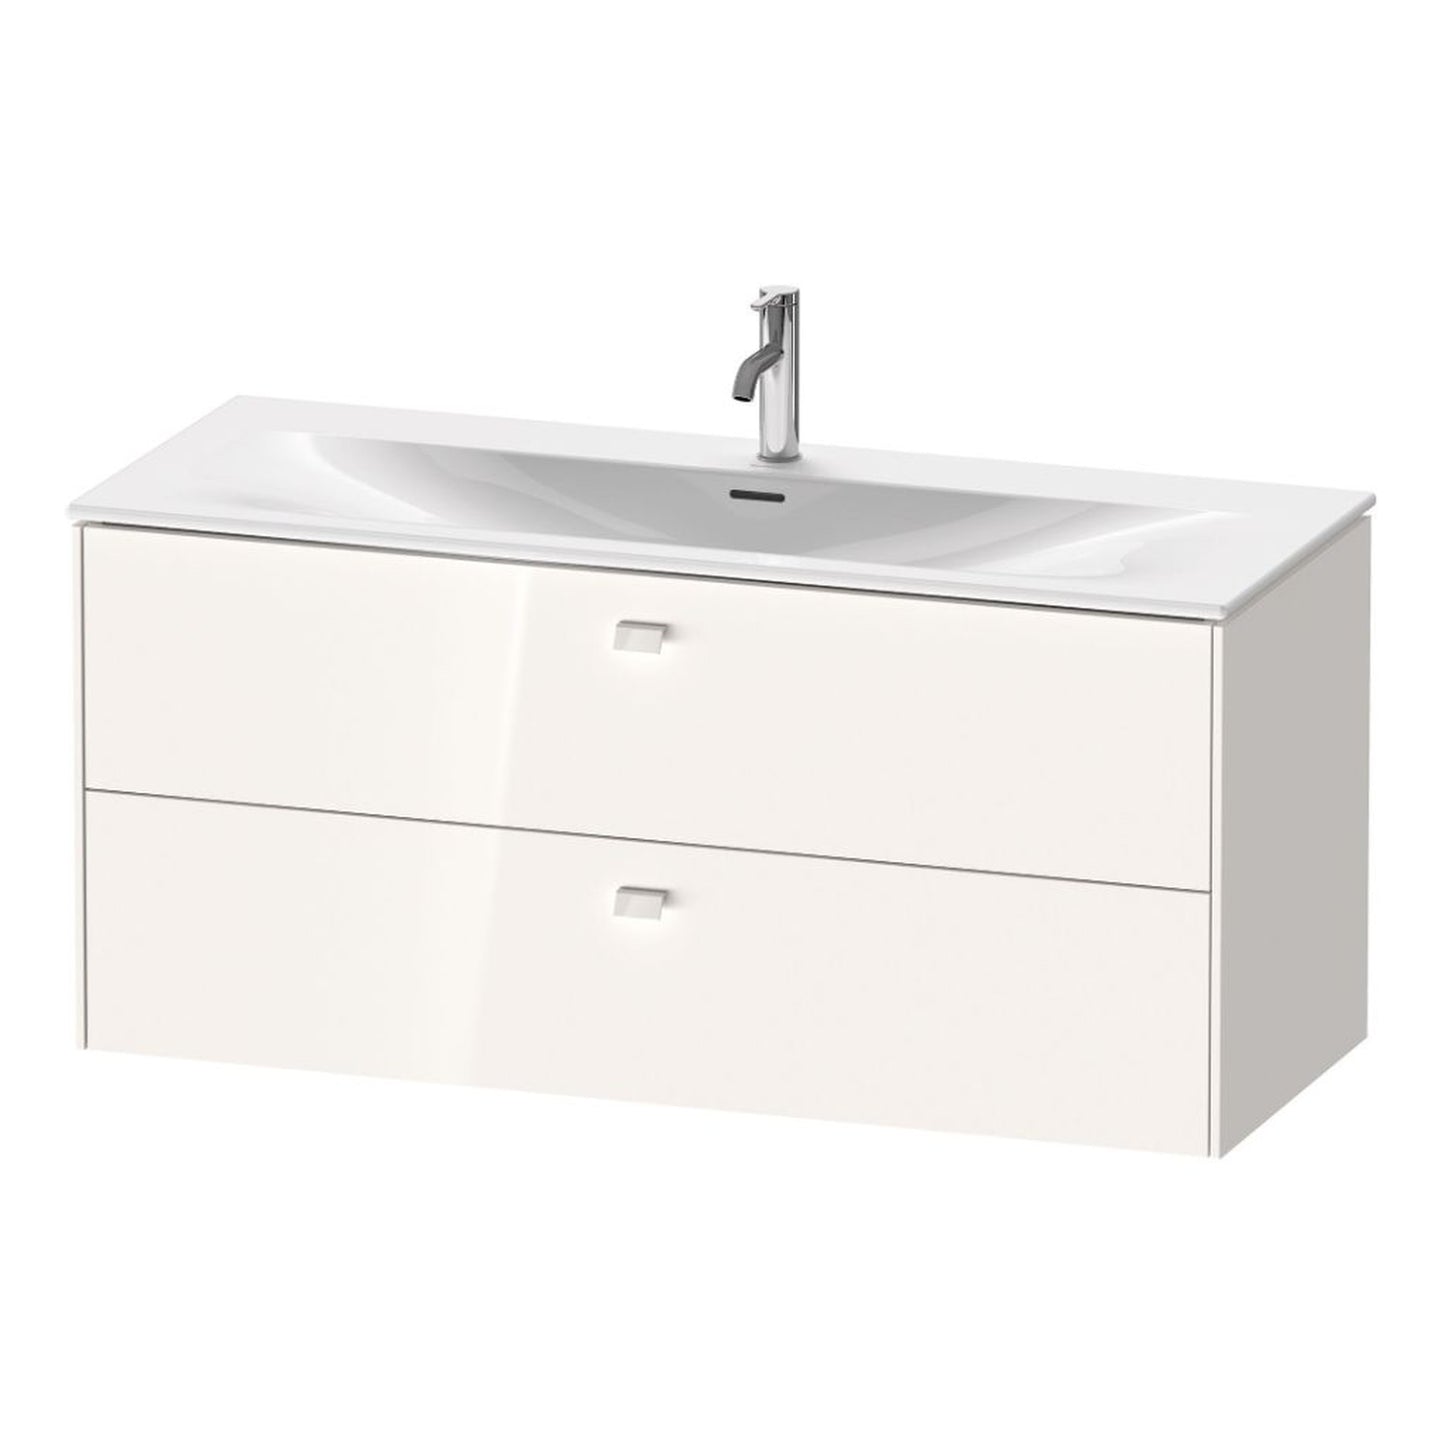 Duravit Brioso BR43140 48" x 22" x 19" Two Drawer Wall-Mount Vanity Unit in White High Gloss